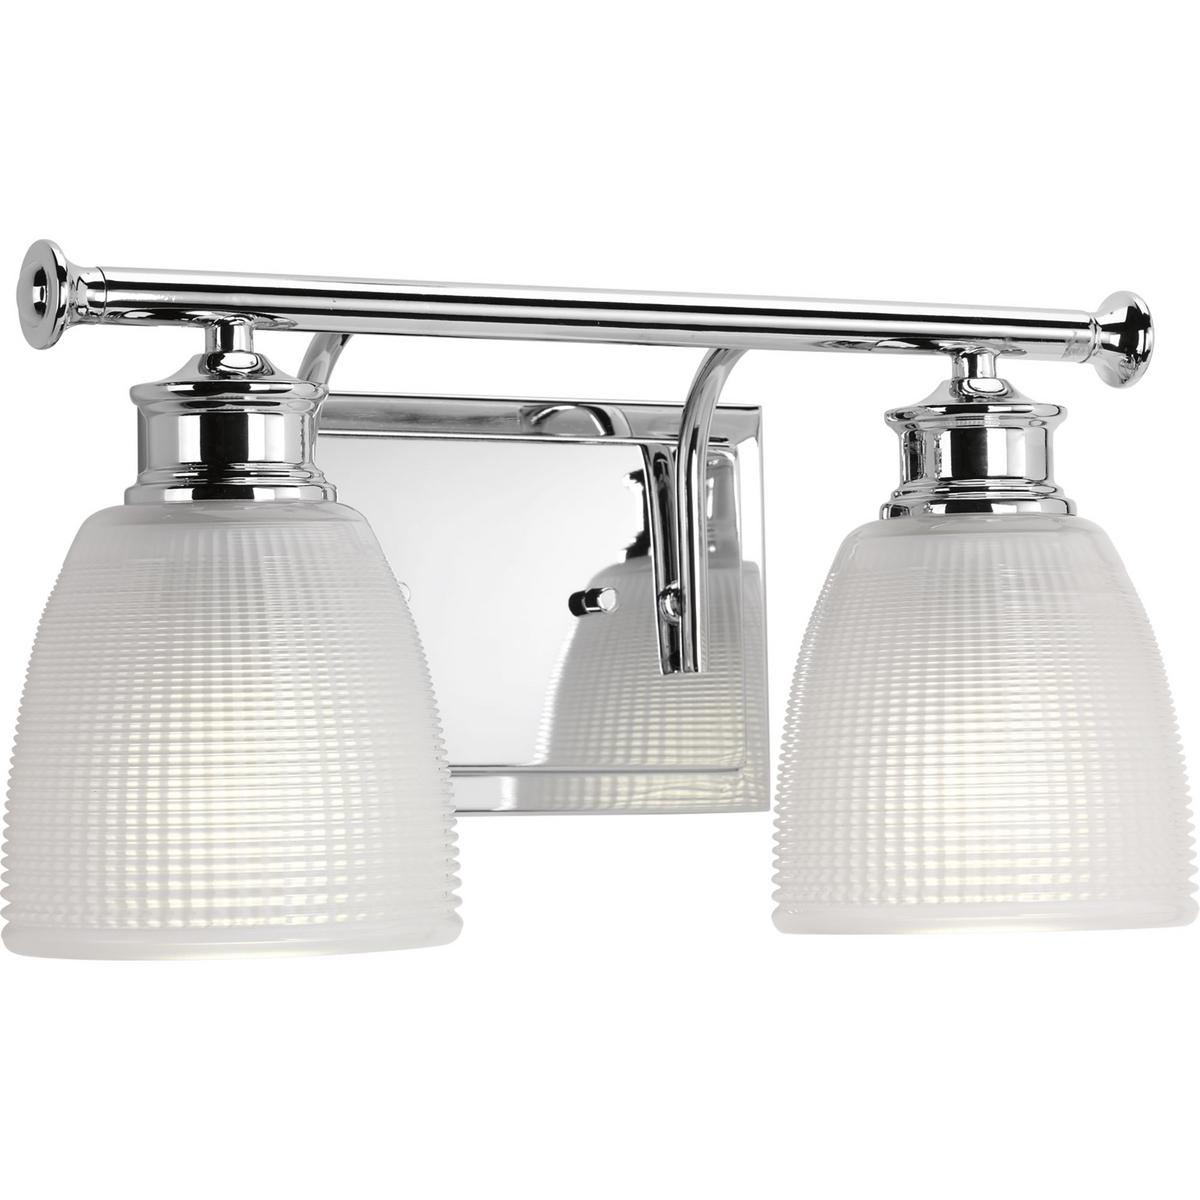 Hubbell P2116-15 Two-light bath from the Lucky Collection, with a distinctive design that evokes a vintage flair with finely crafted details. Light is beautifully illuminated through double prismatic frosted glass shades. Polished Chrome finish.  ; Ideal for a bathroom an